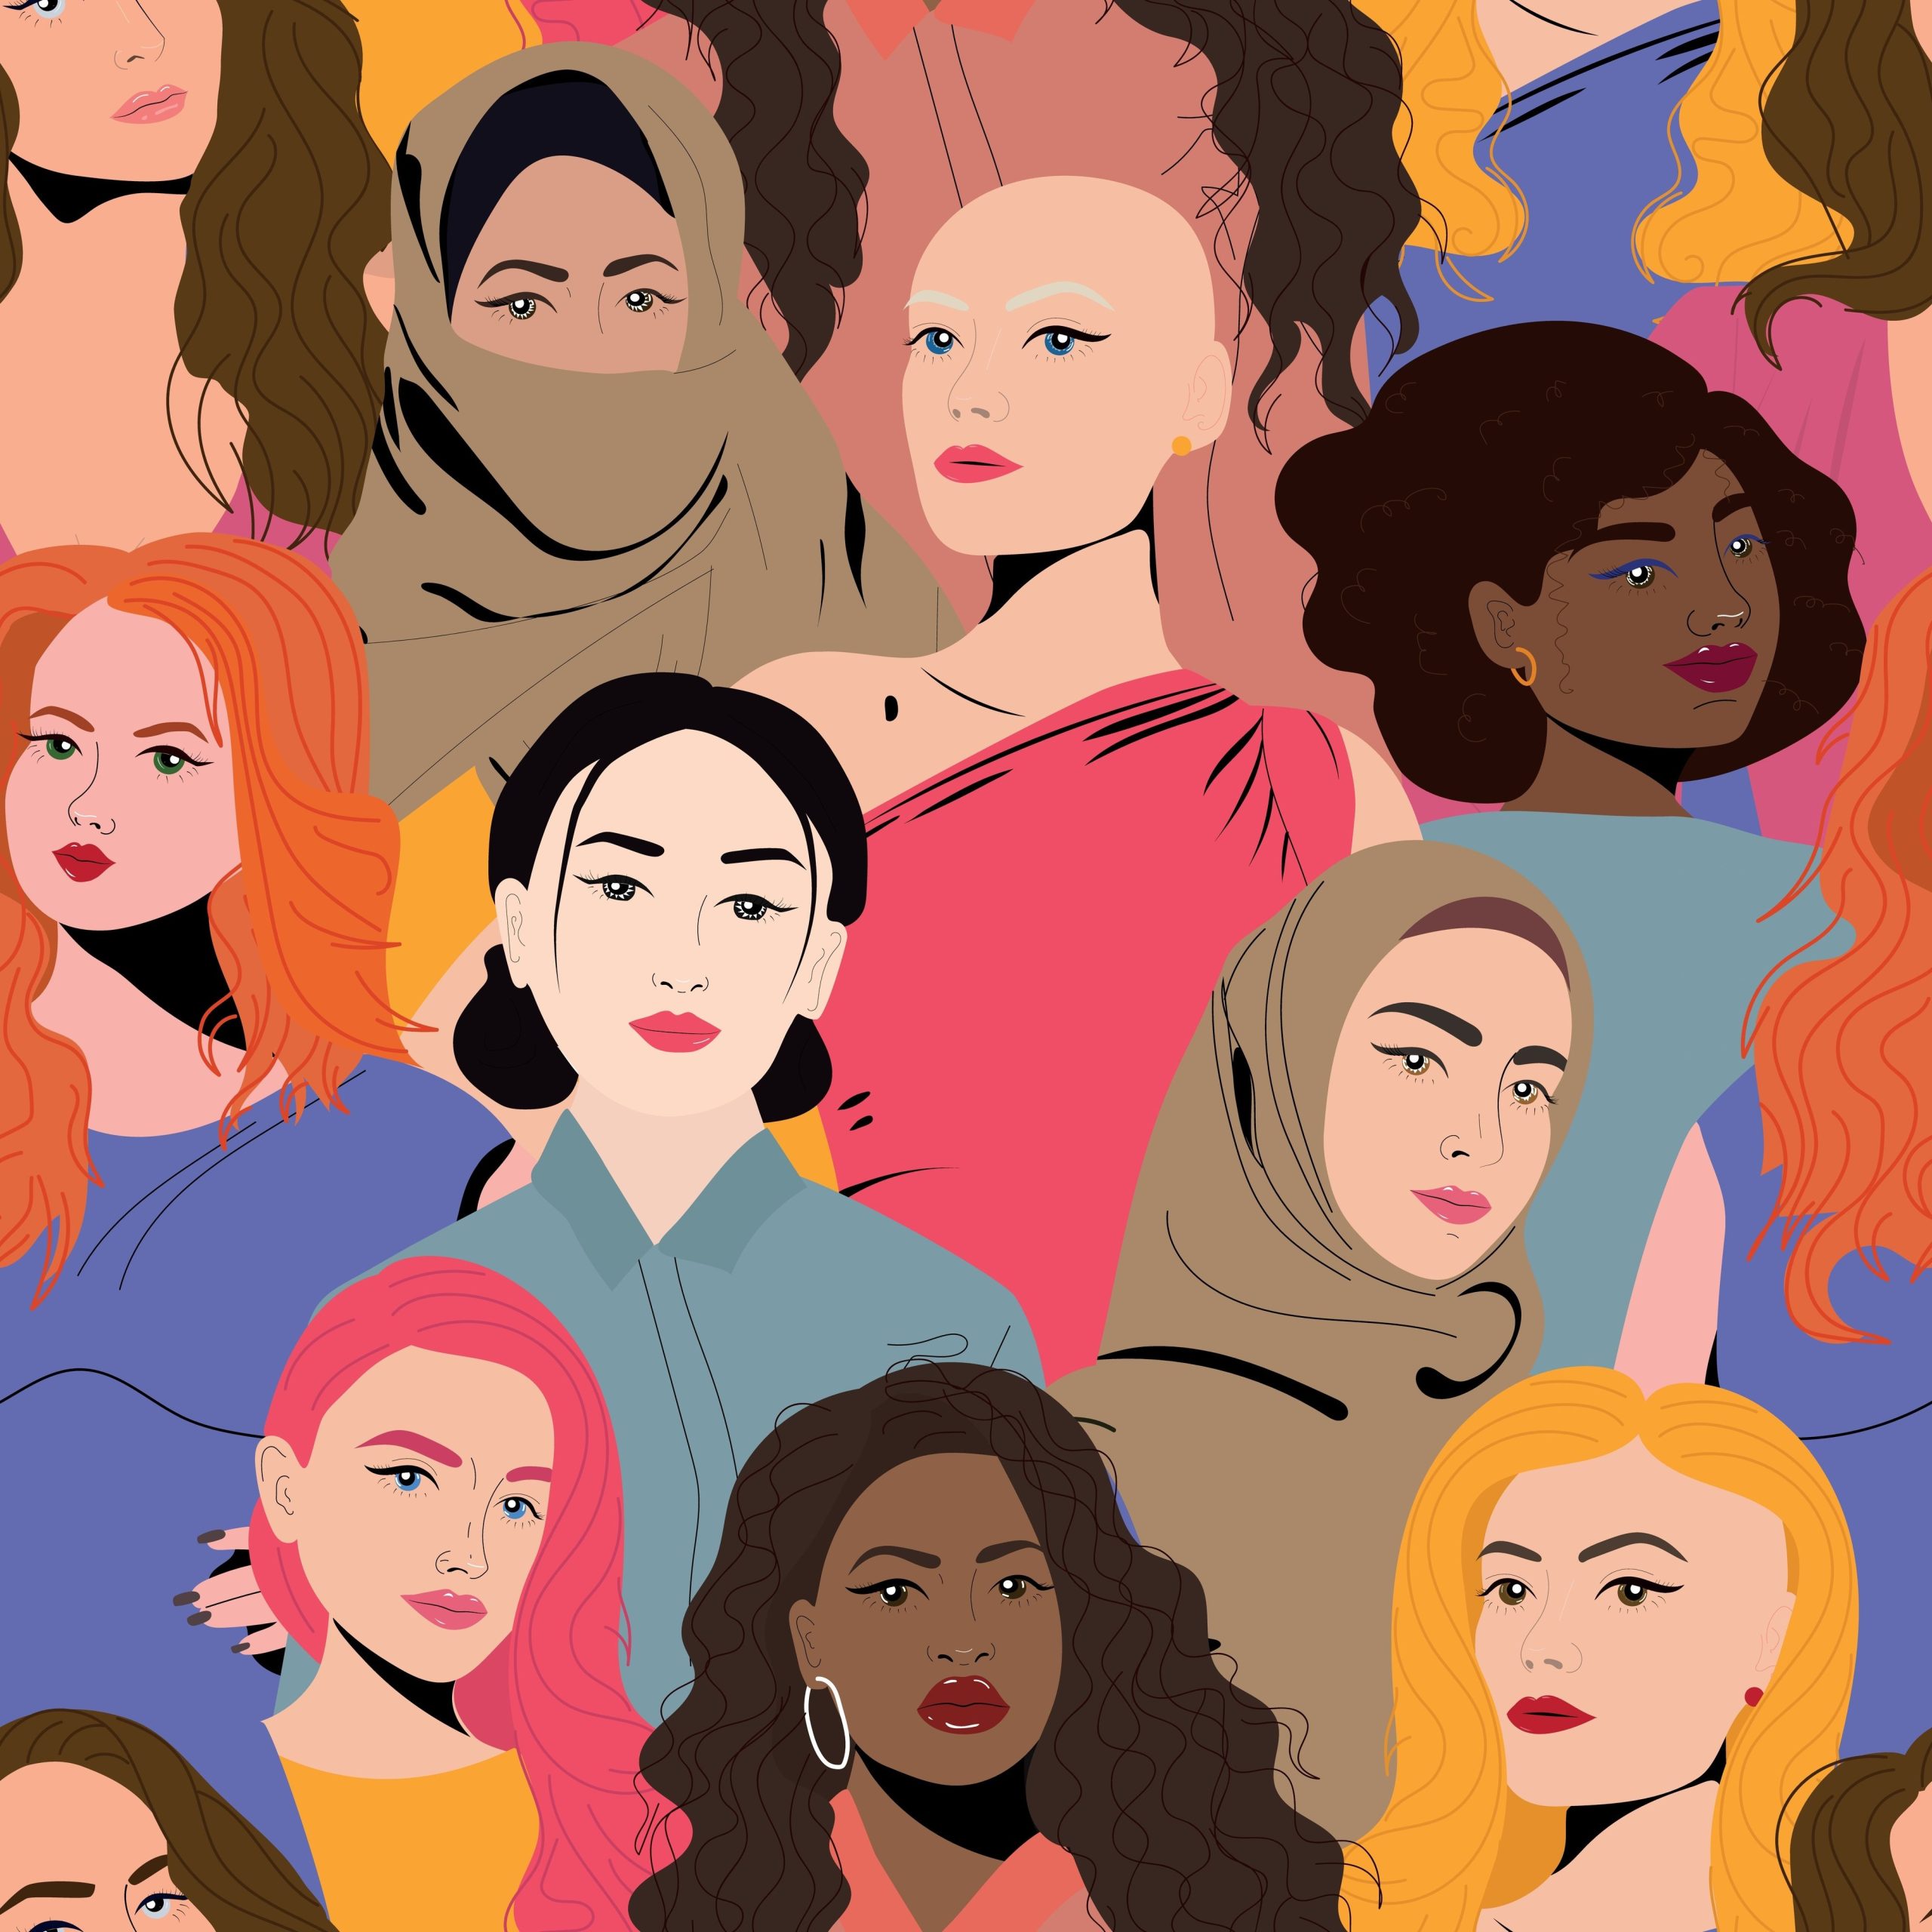 Reflections on Women’s History Month